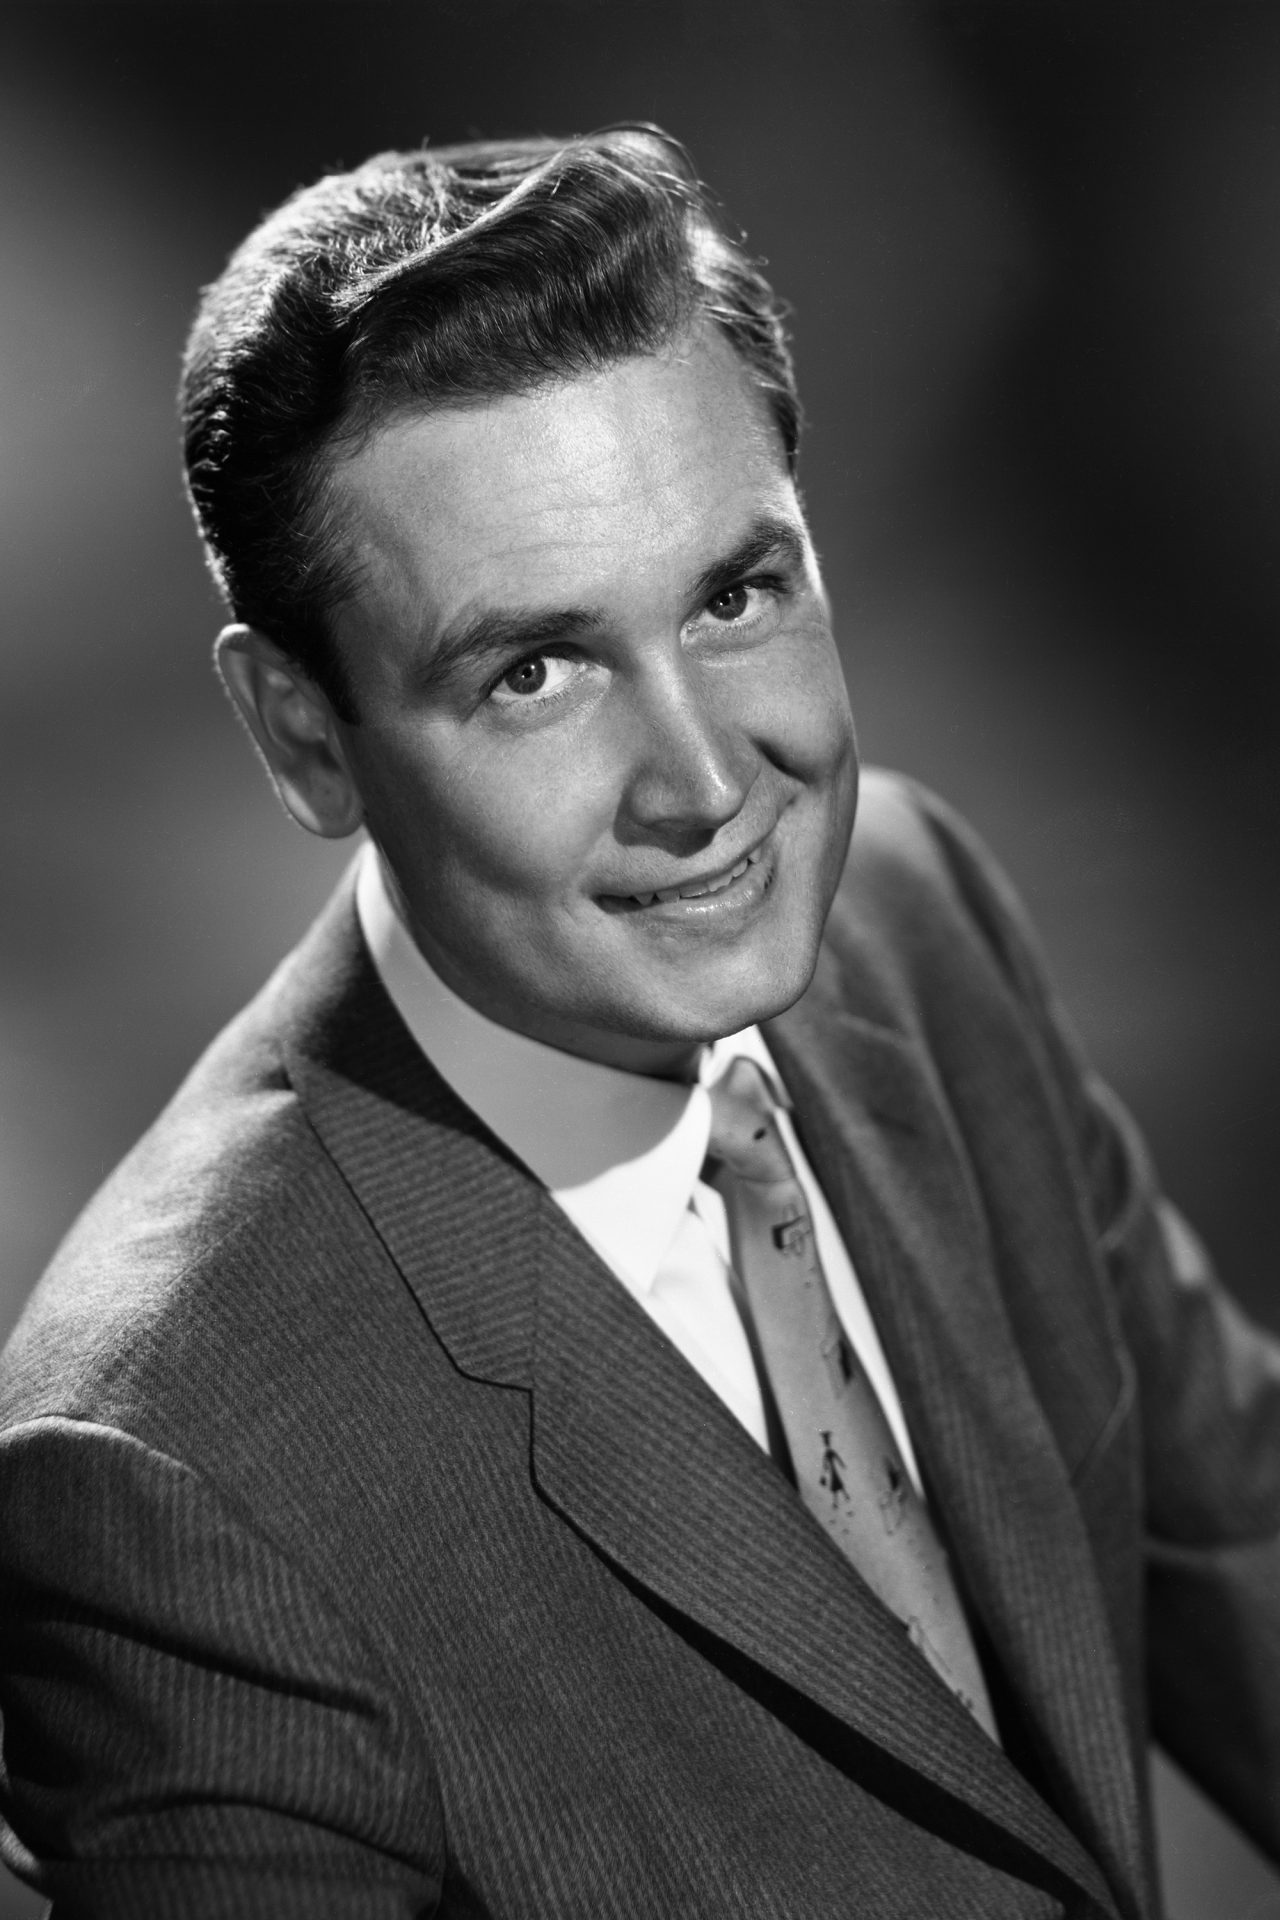 During World War II, Bob Barker joined the U.S. Navy Reserve